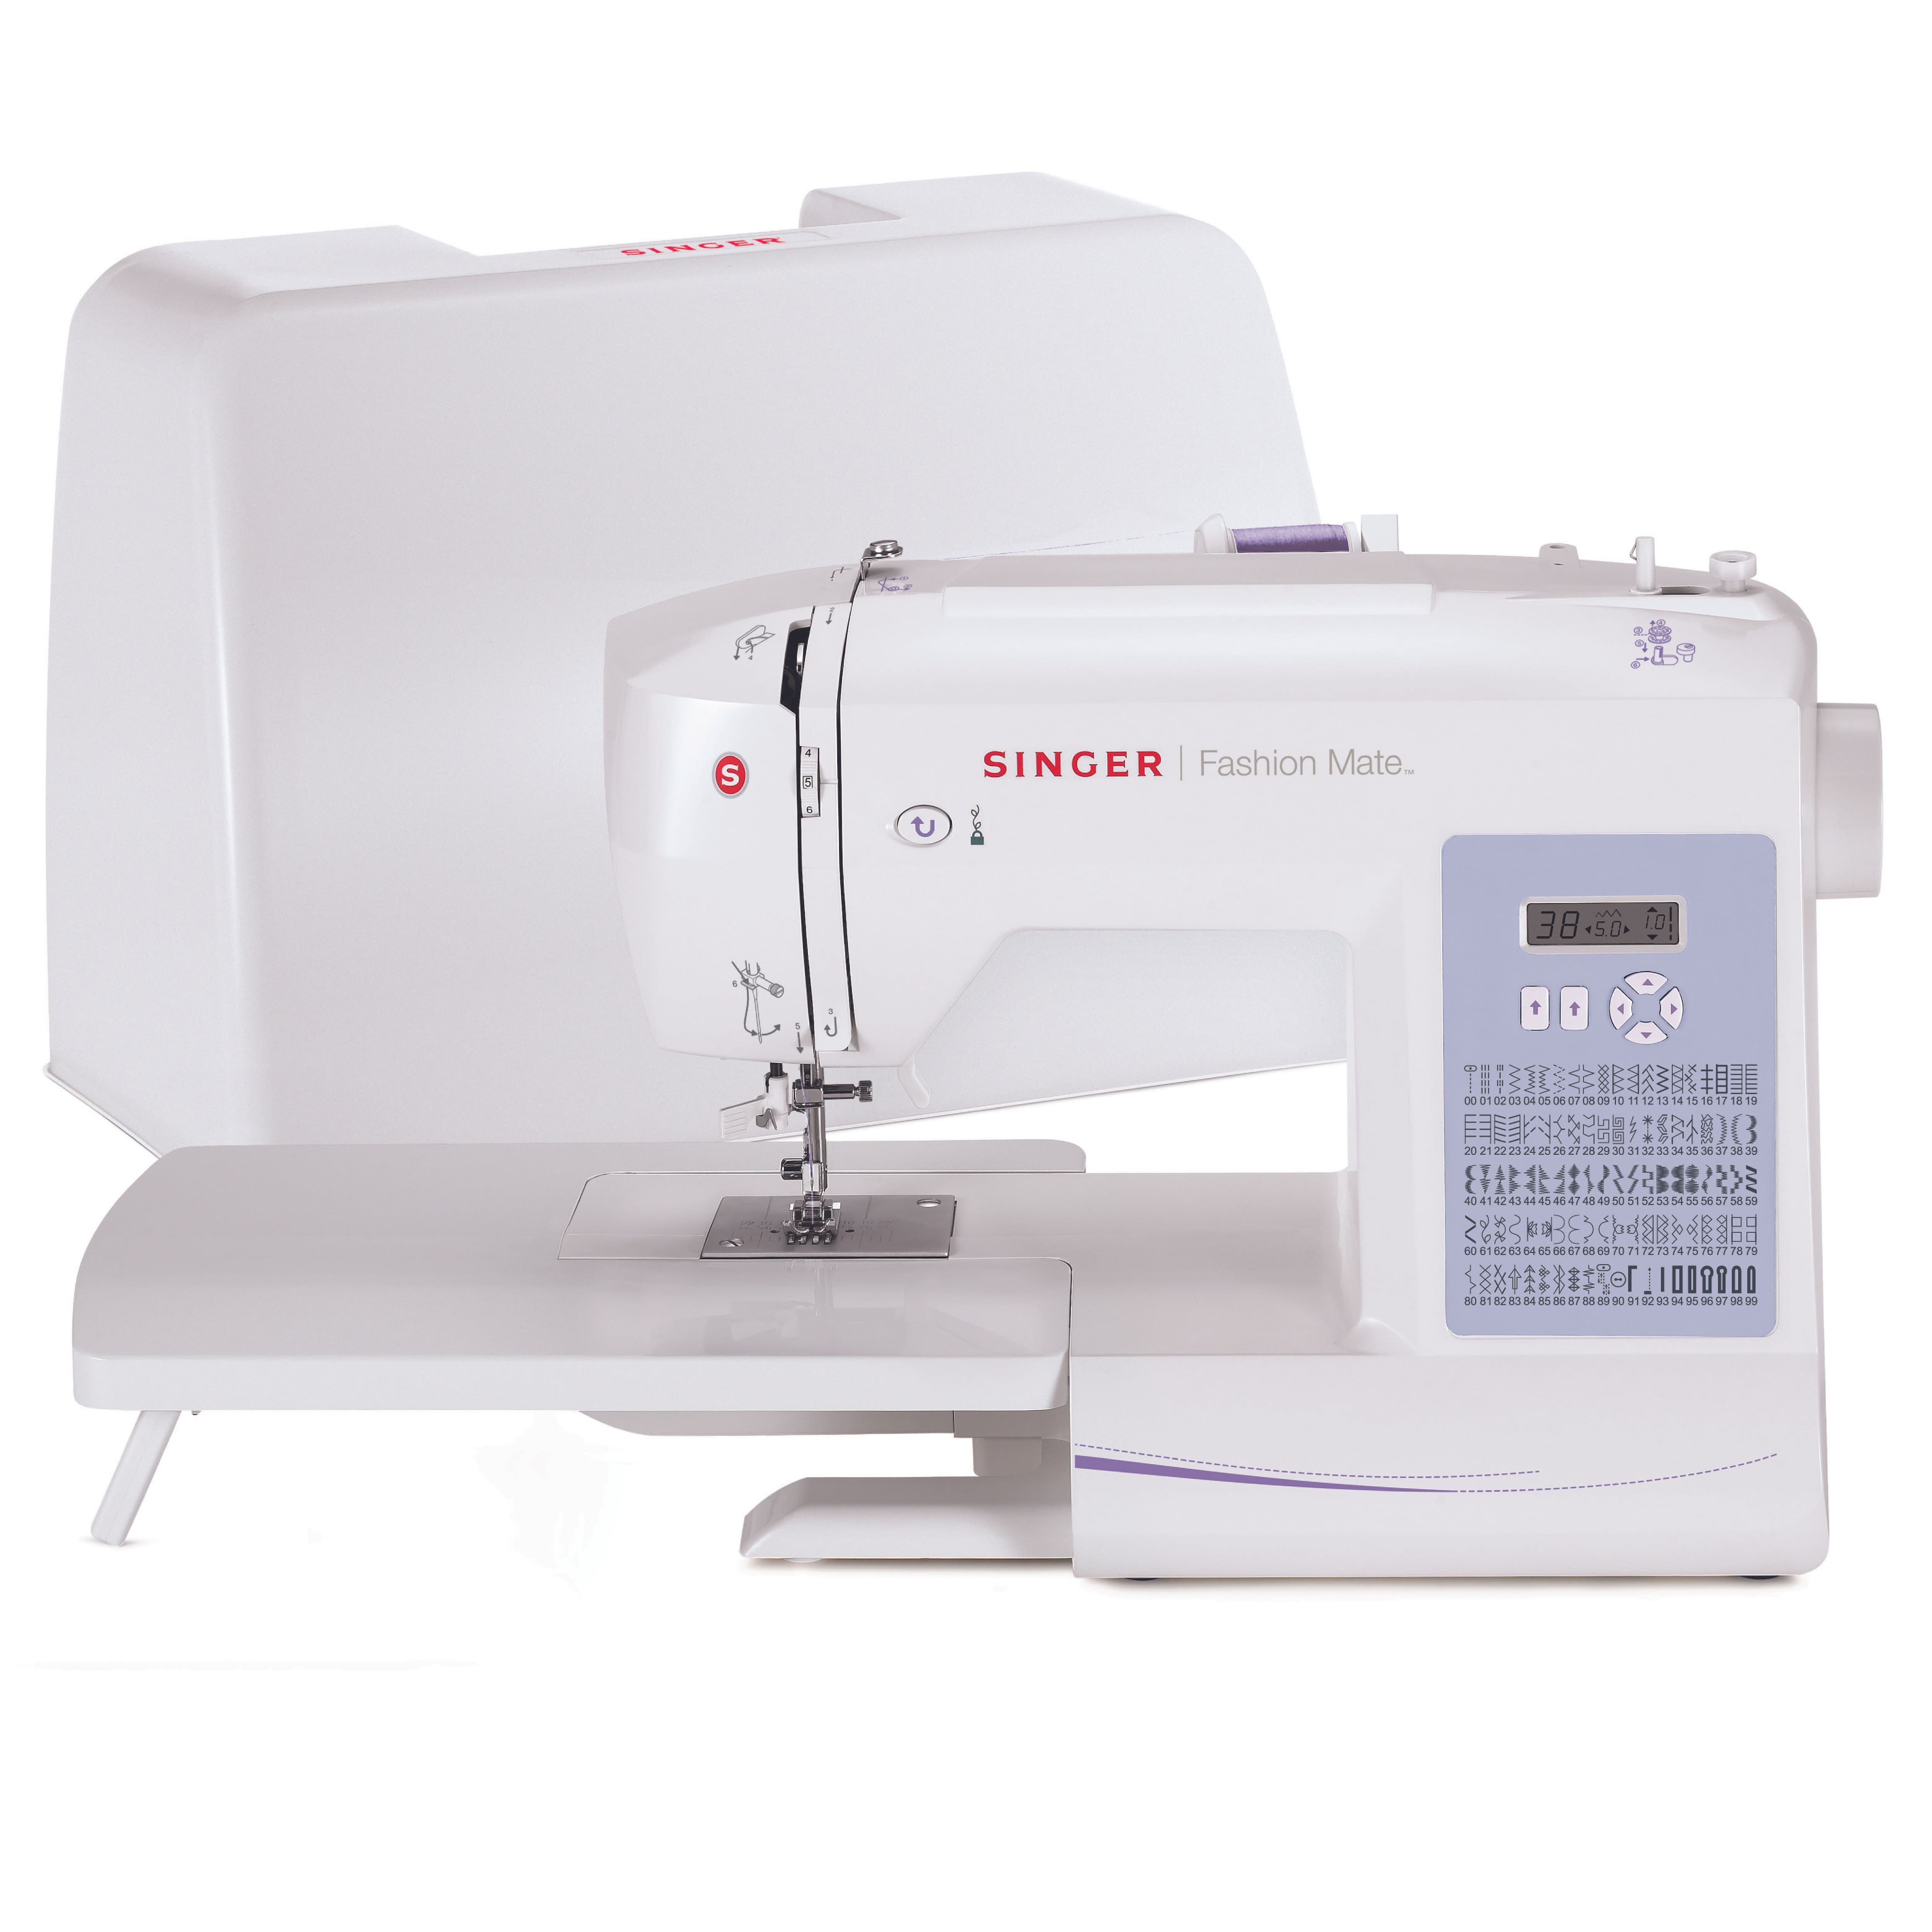 SINGER Heavy Duty Sewing Machine With Included Accessory Kit & Reviews